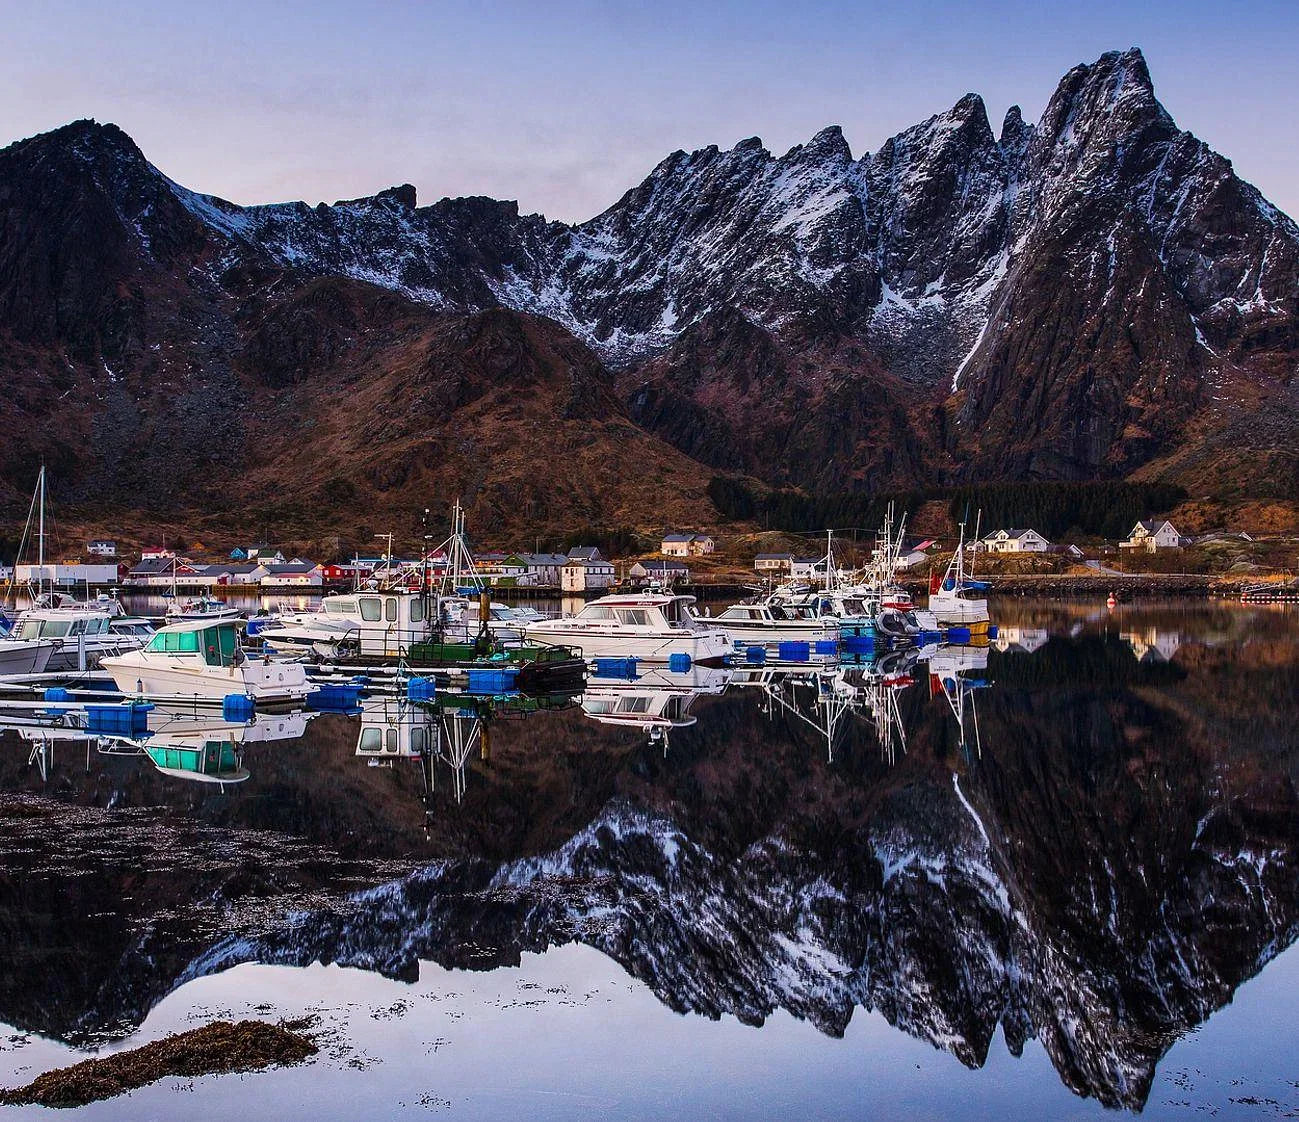 Reflection of the mountains under boats in the Ballstad harbor in Norway during a group trip.